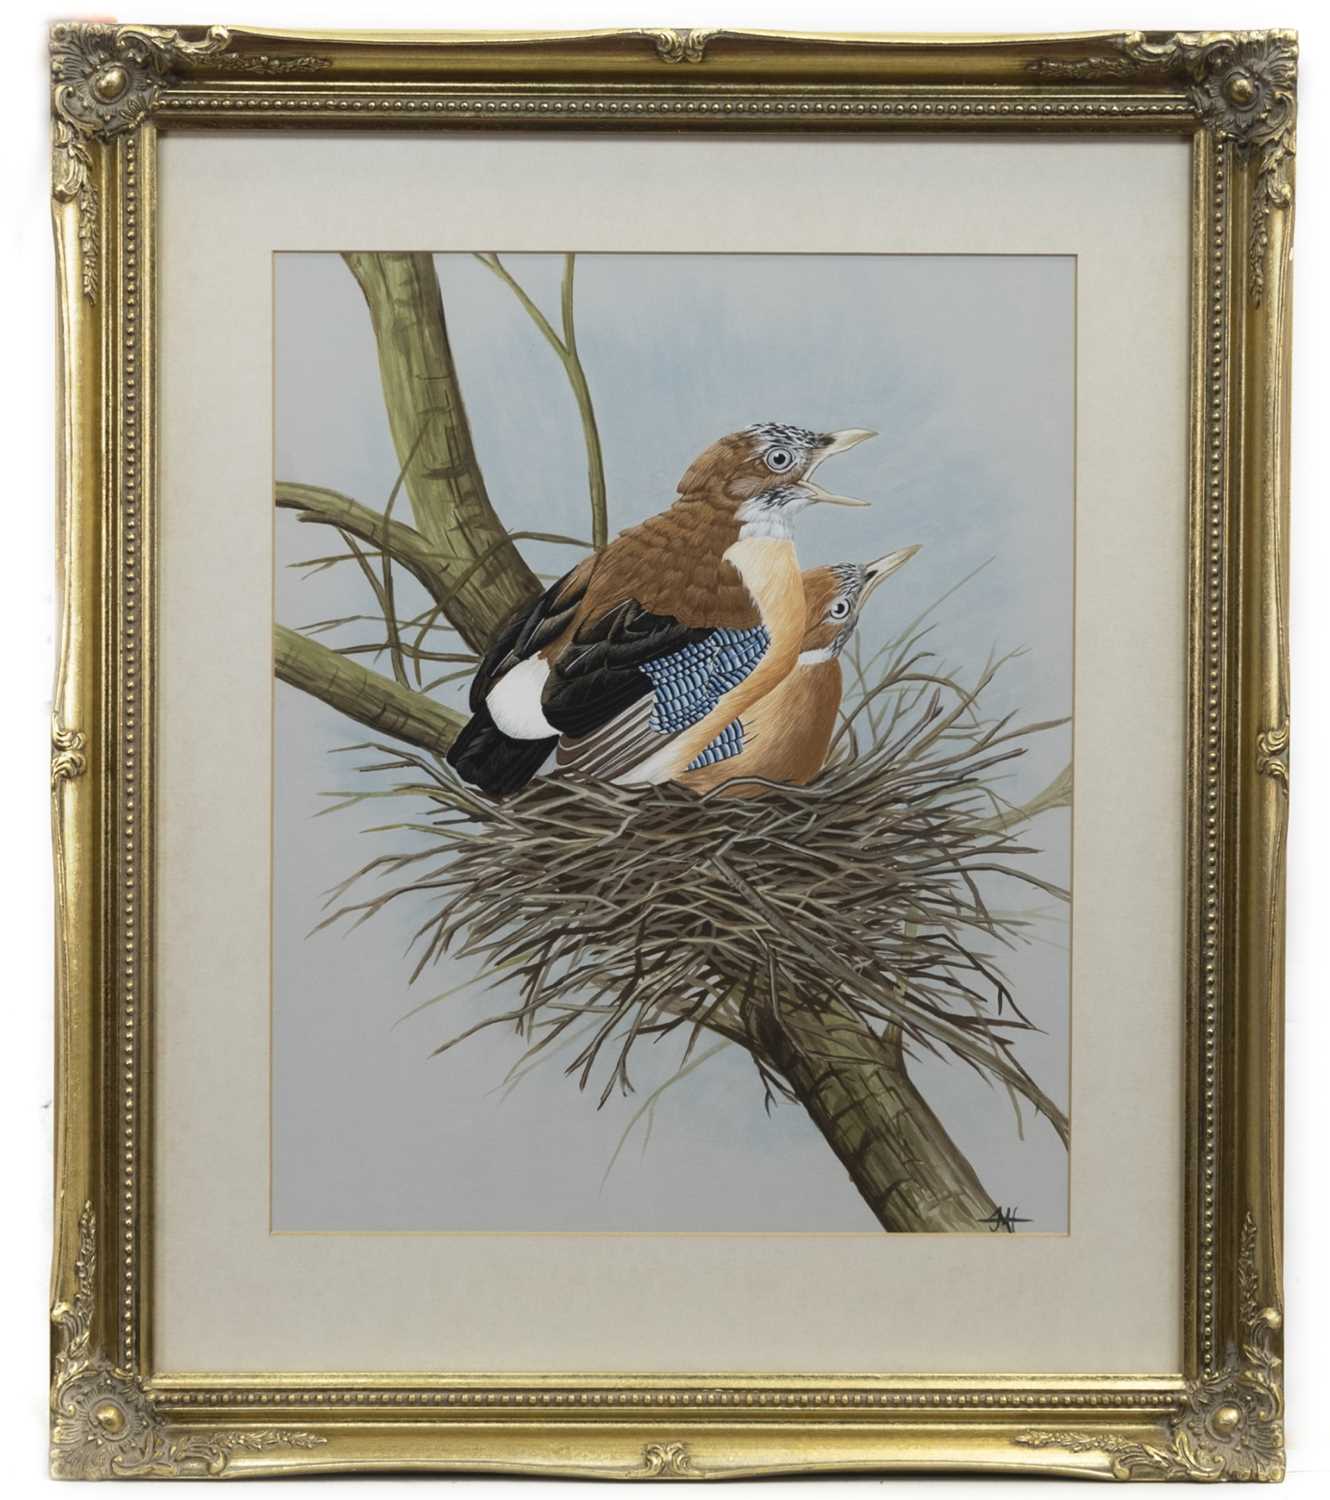 Lot 24 - NESTED BIRDS, A 20TH CENTURY WATERCOLOUR